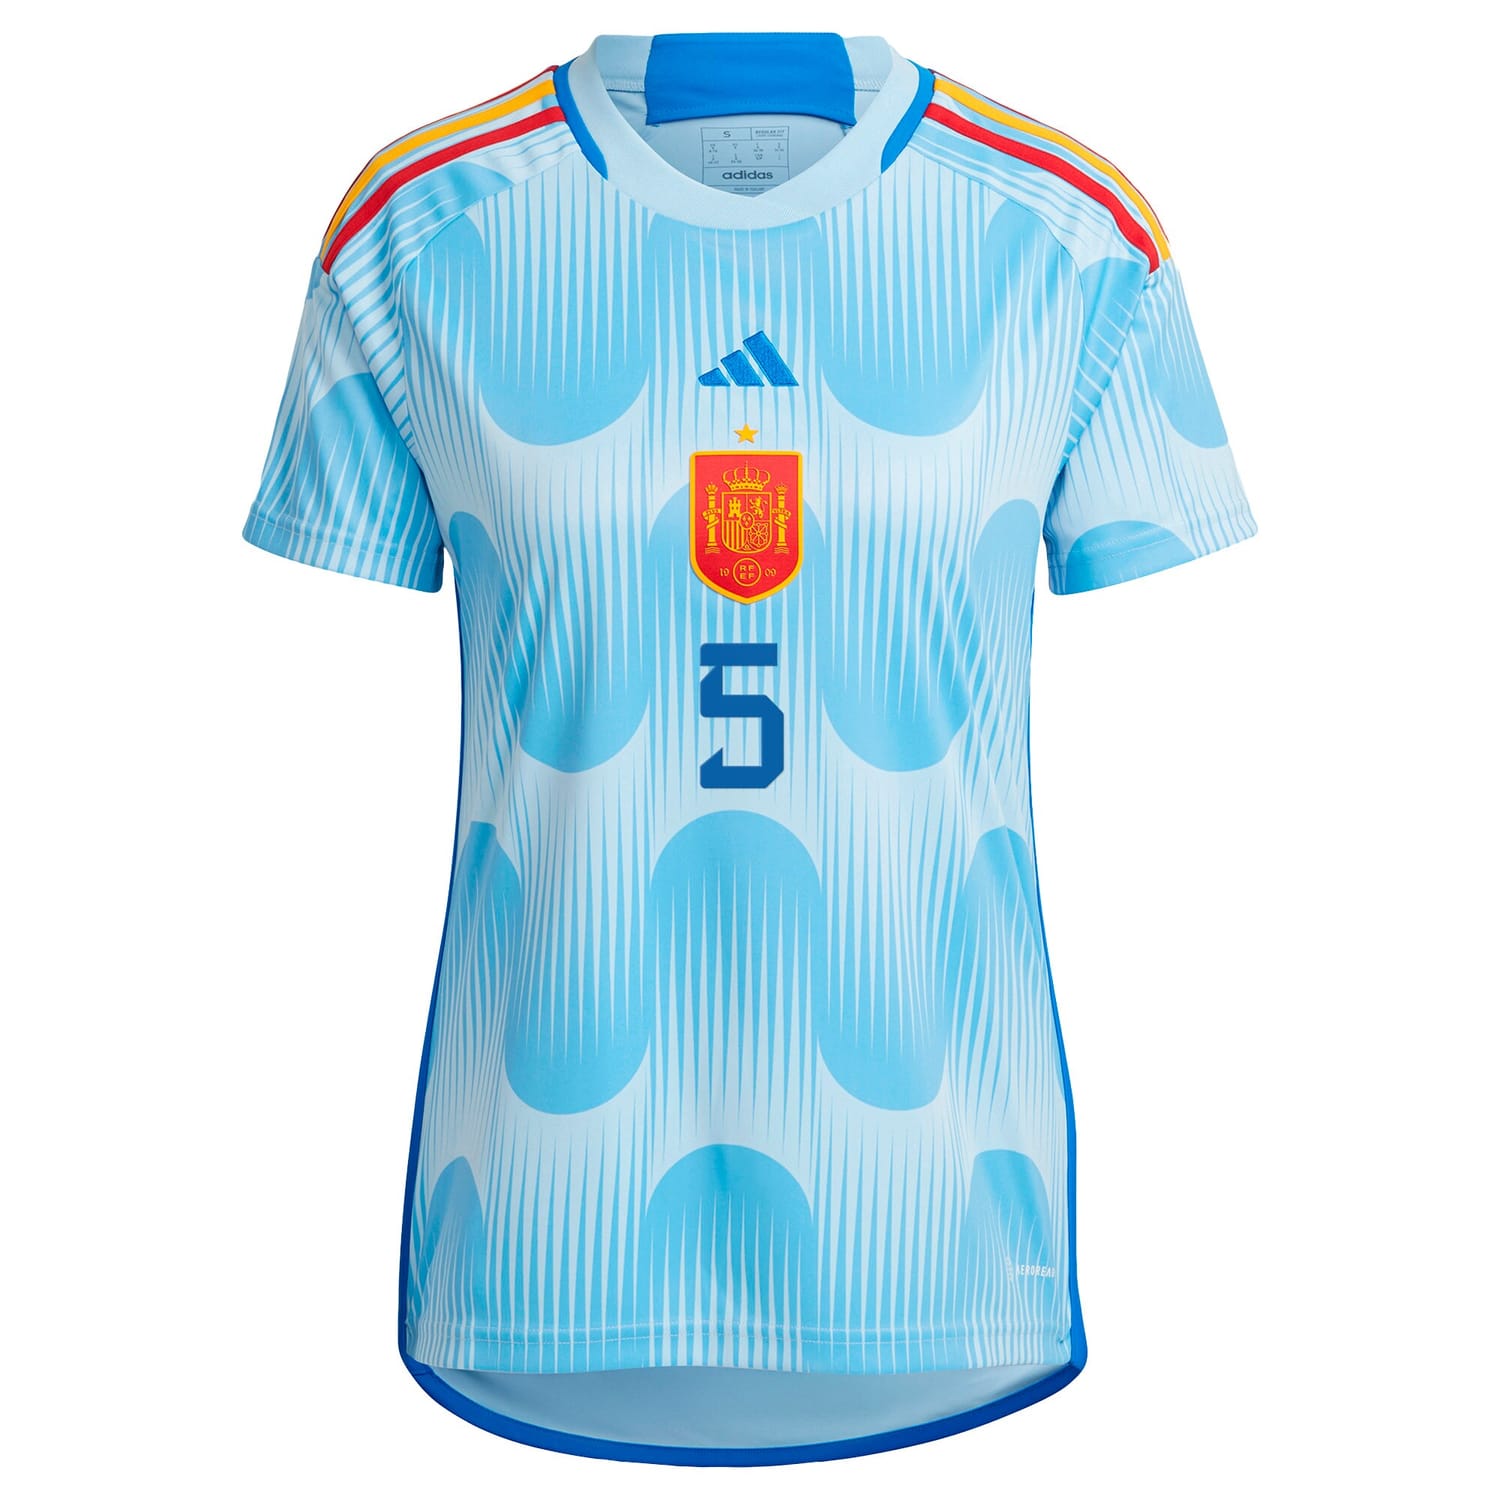 Spain National Team Away Jersey Shirt Blue 2022-23 player Sergio Busquets printing for Women